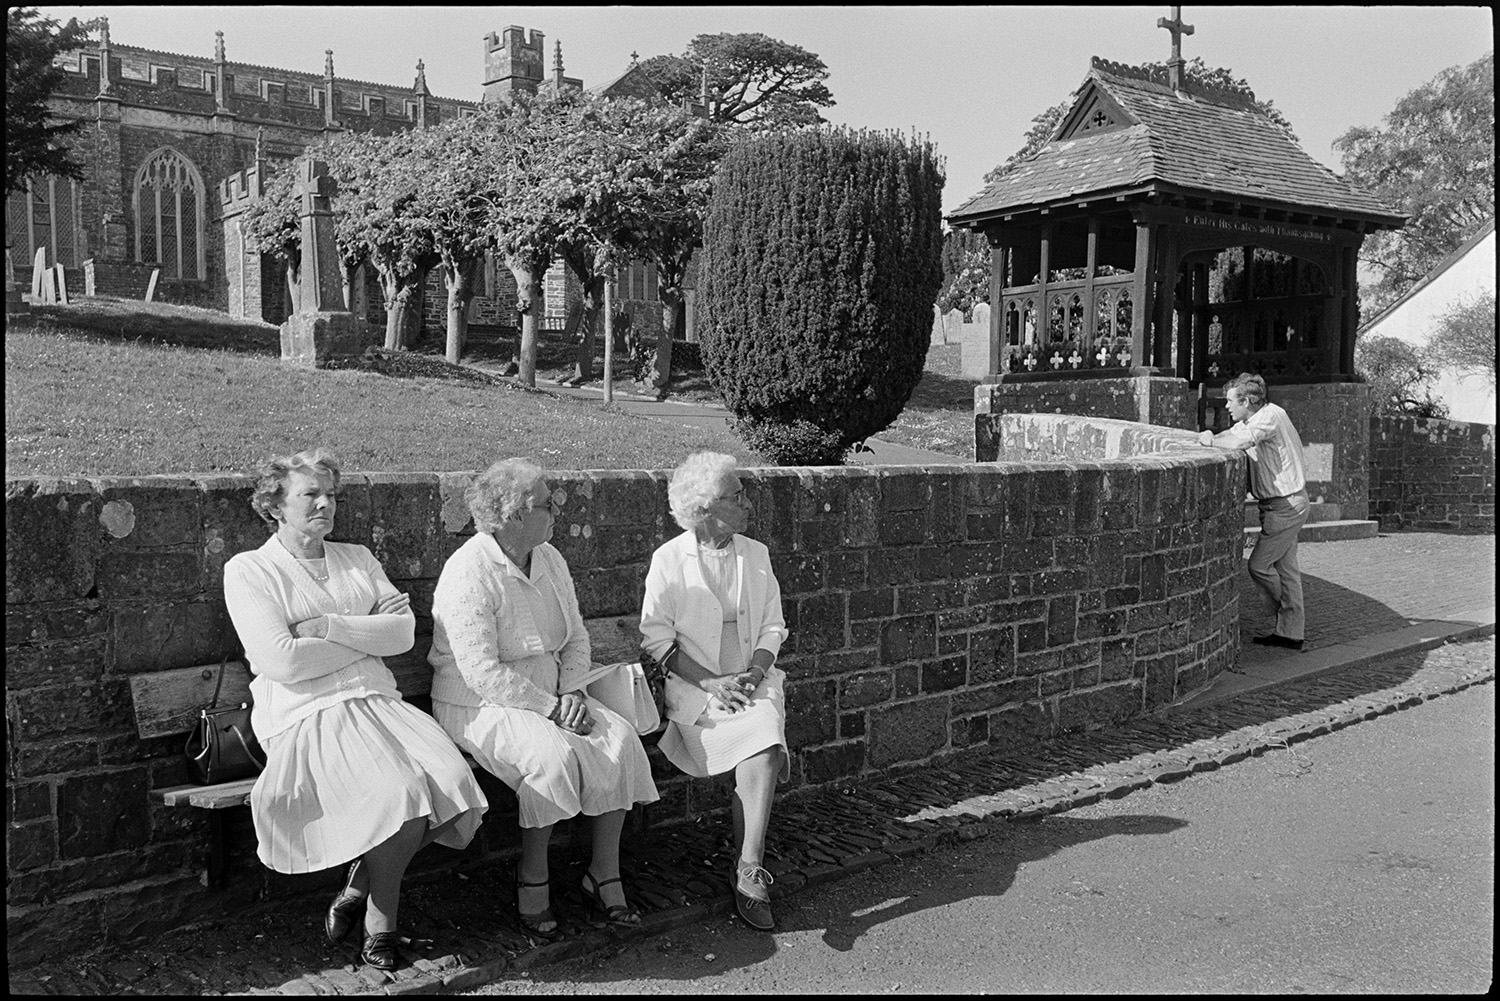 Three women on bench in front of church gate.
[Three women sitting on a bench and a man leaning on the wall in front of the lychgate entrance to Chittlehampton Church. An avenue of trees leads up to the church.]